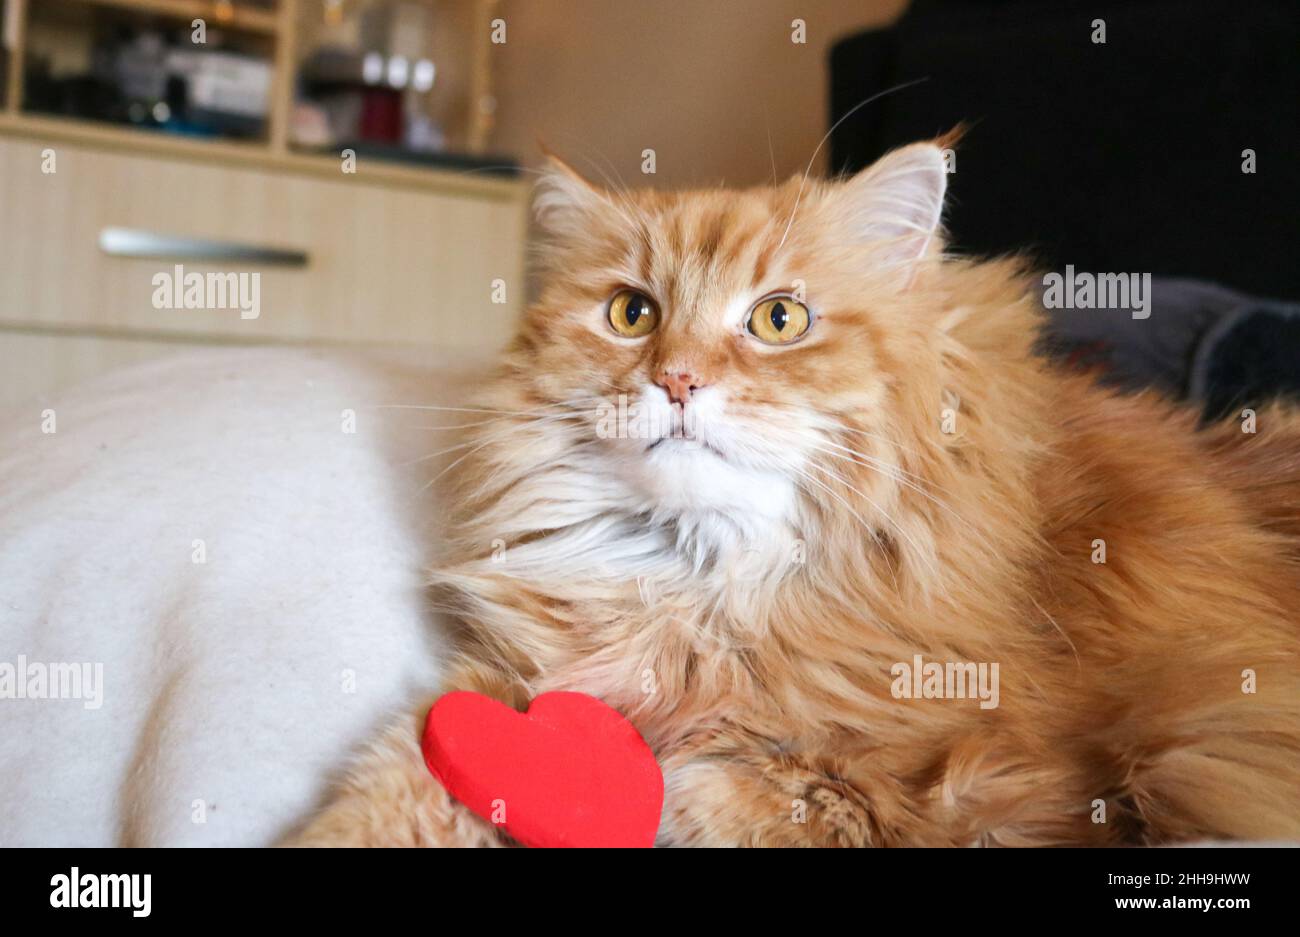 Ginger cat with a red heart Stock Photo